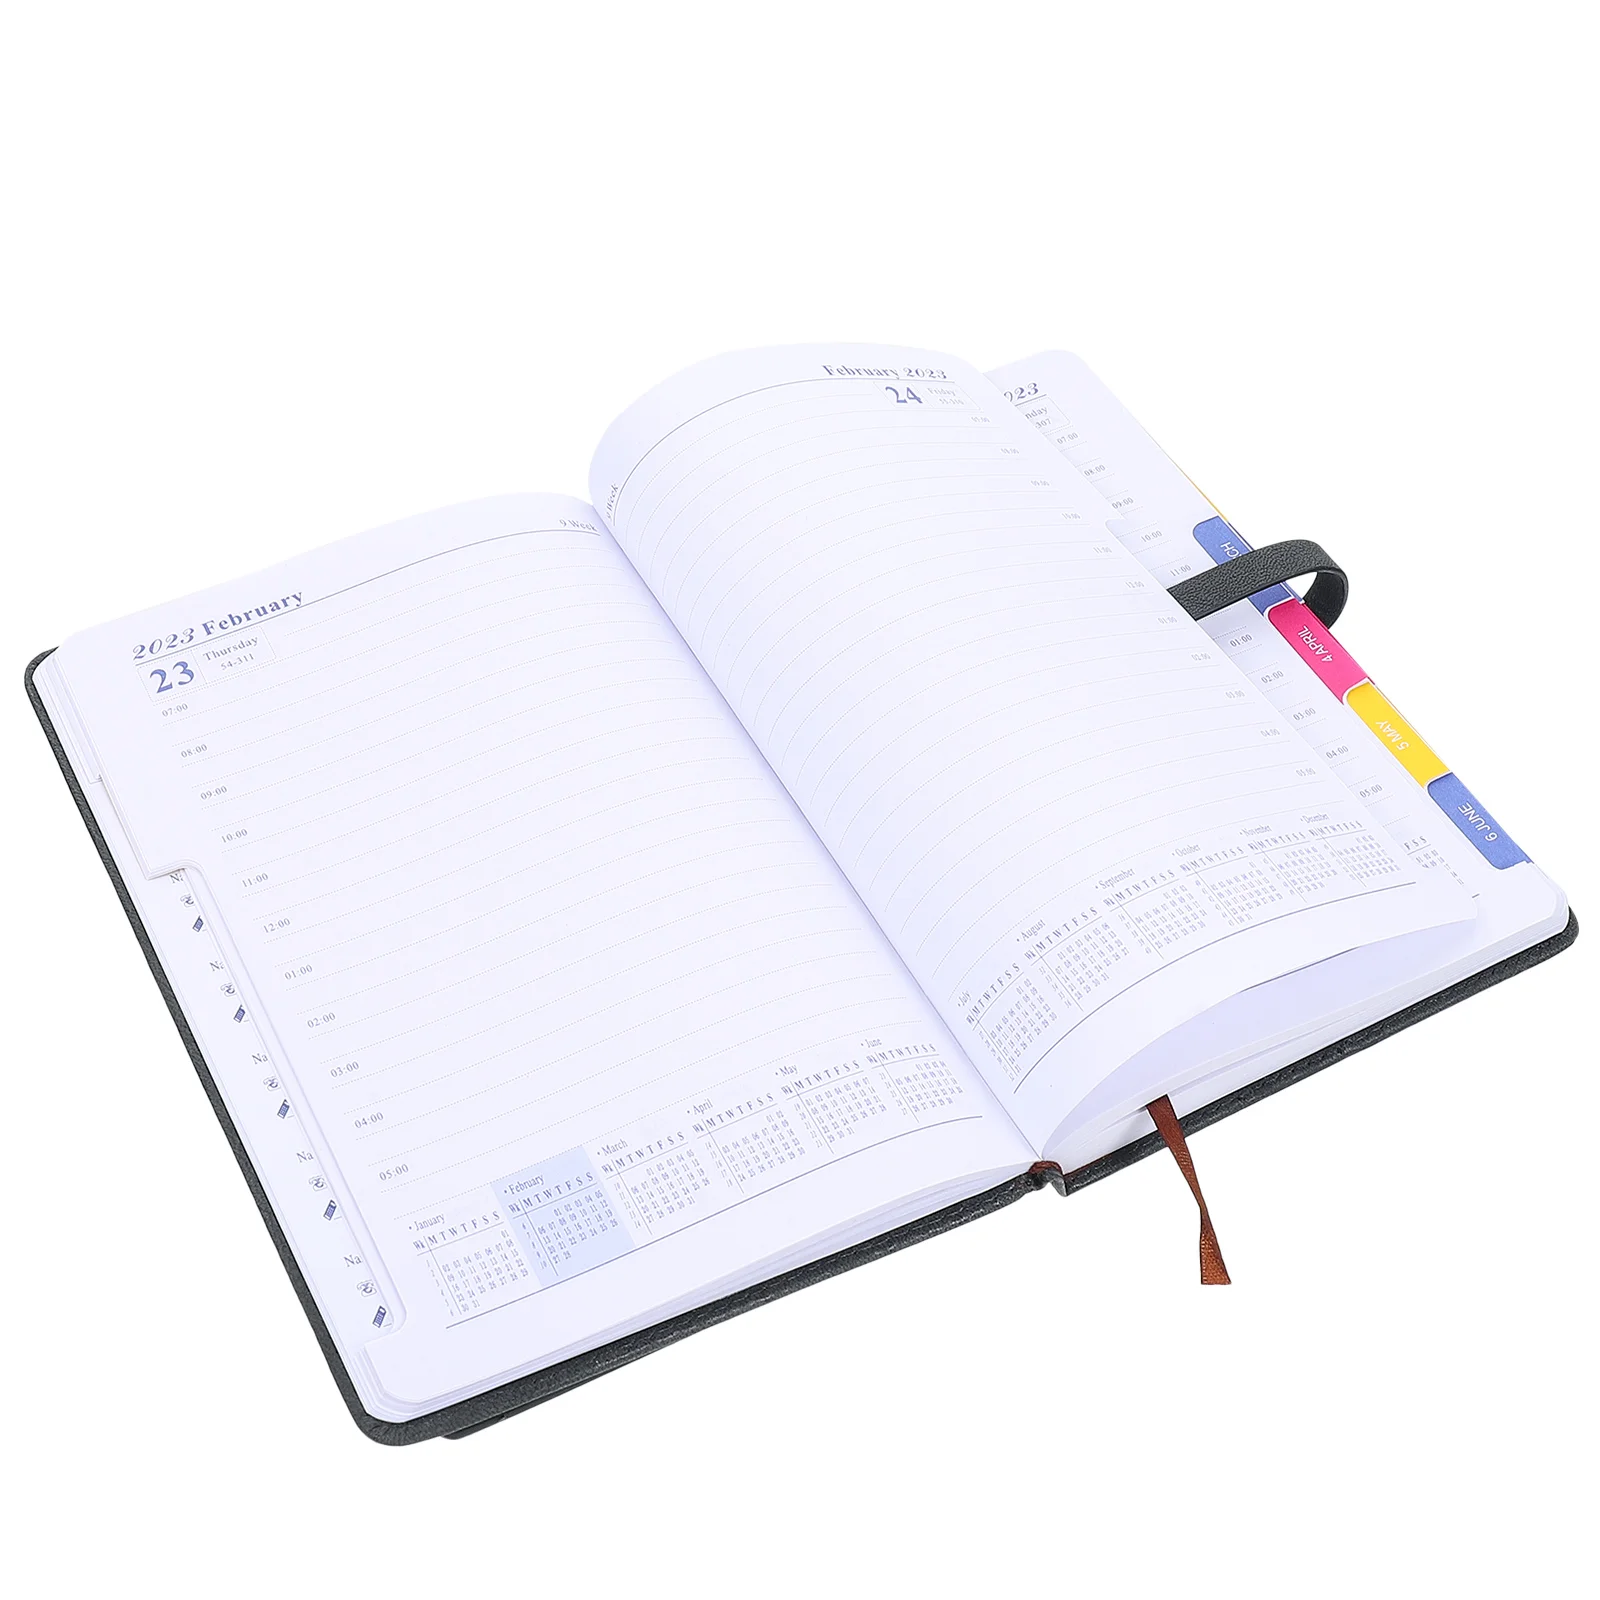 

Notebook Planner Daily Journal Notepad Calendar Planners Calendars Weekly Writing Agenda Office Time Organizers A5 Planning